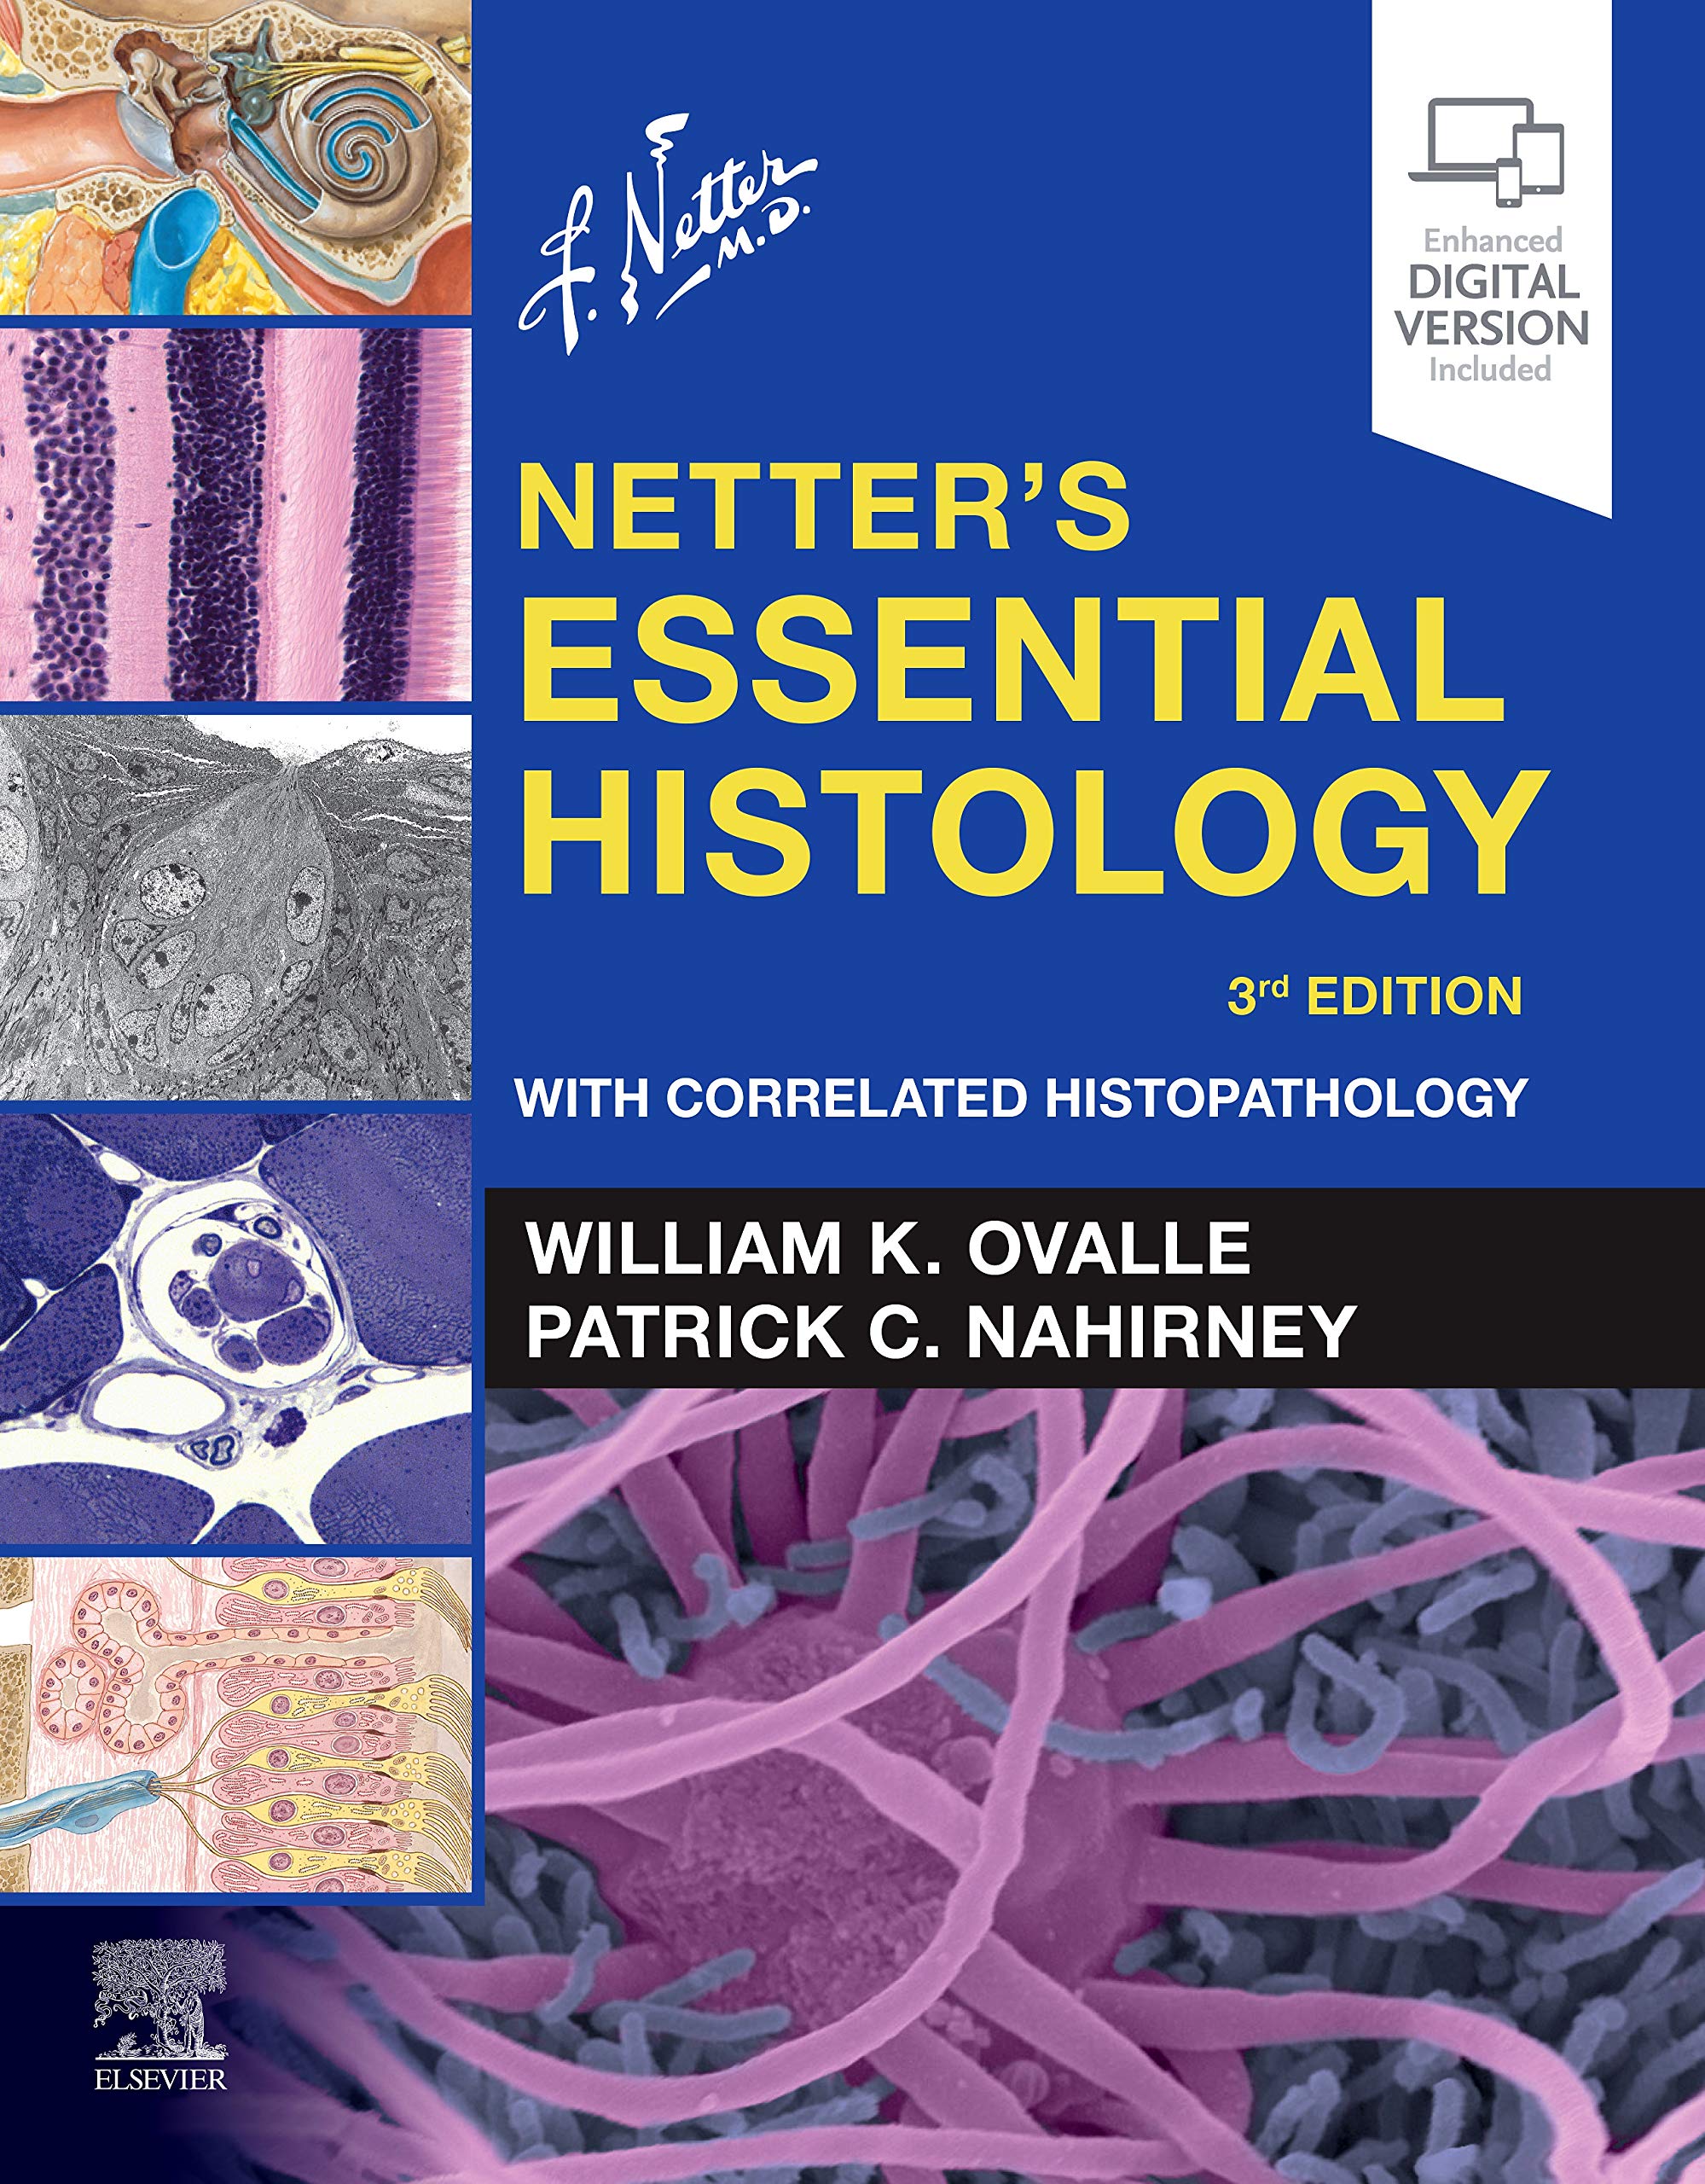 netters-essential-histology-with-correlated-histopathology-netter-basic-science